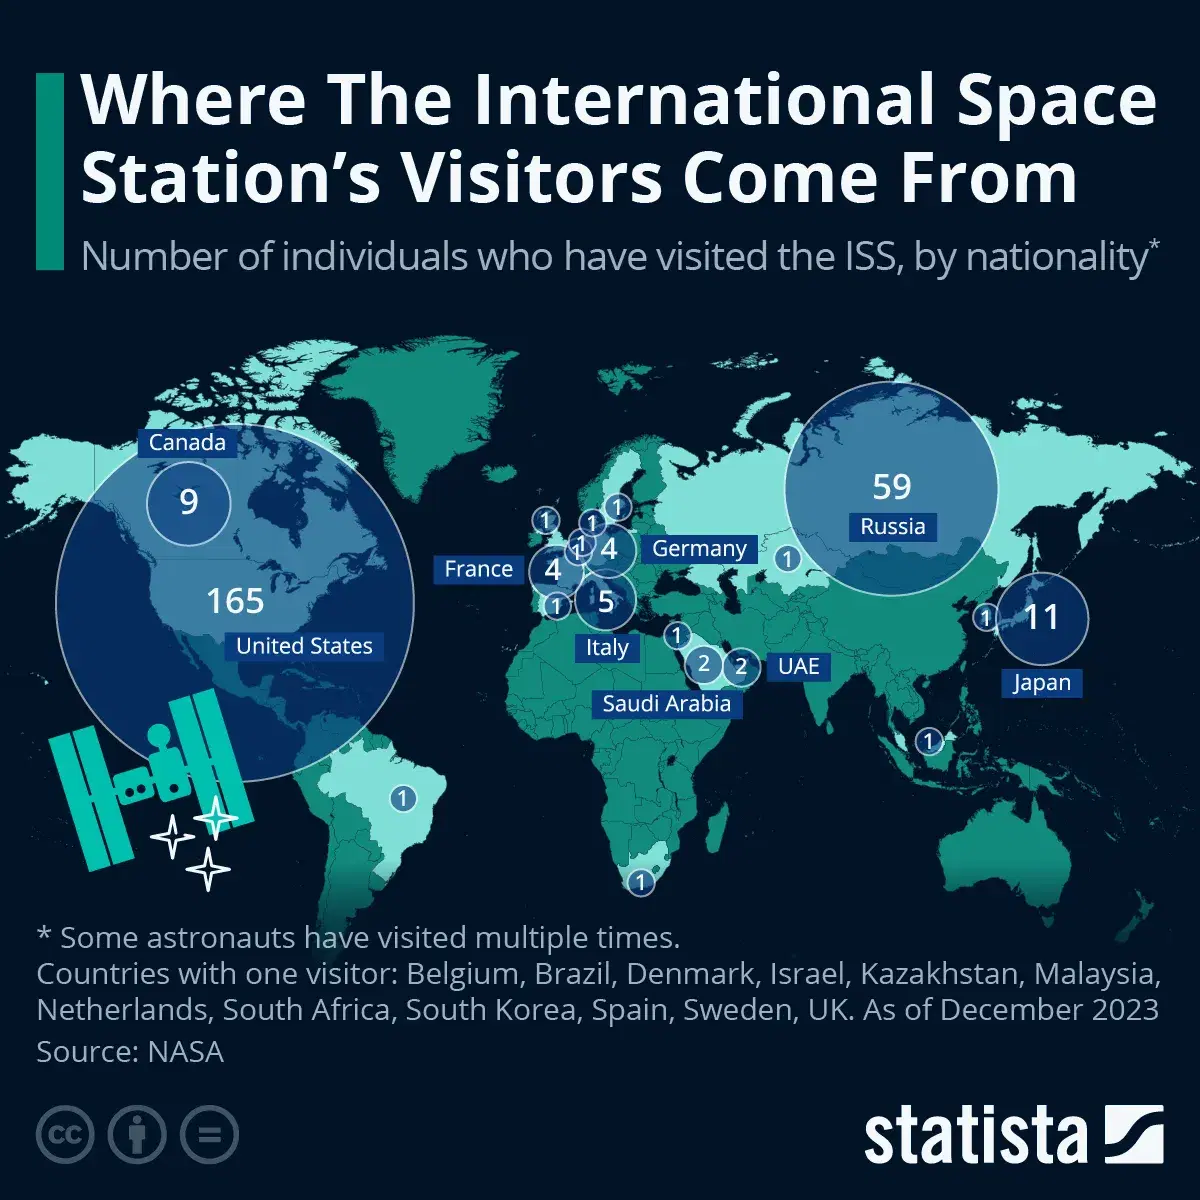 Where The International Space Station's Visitors Come From